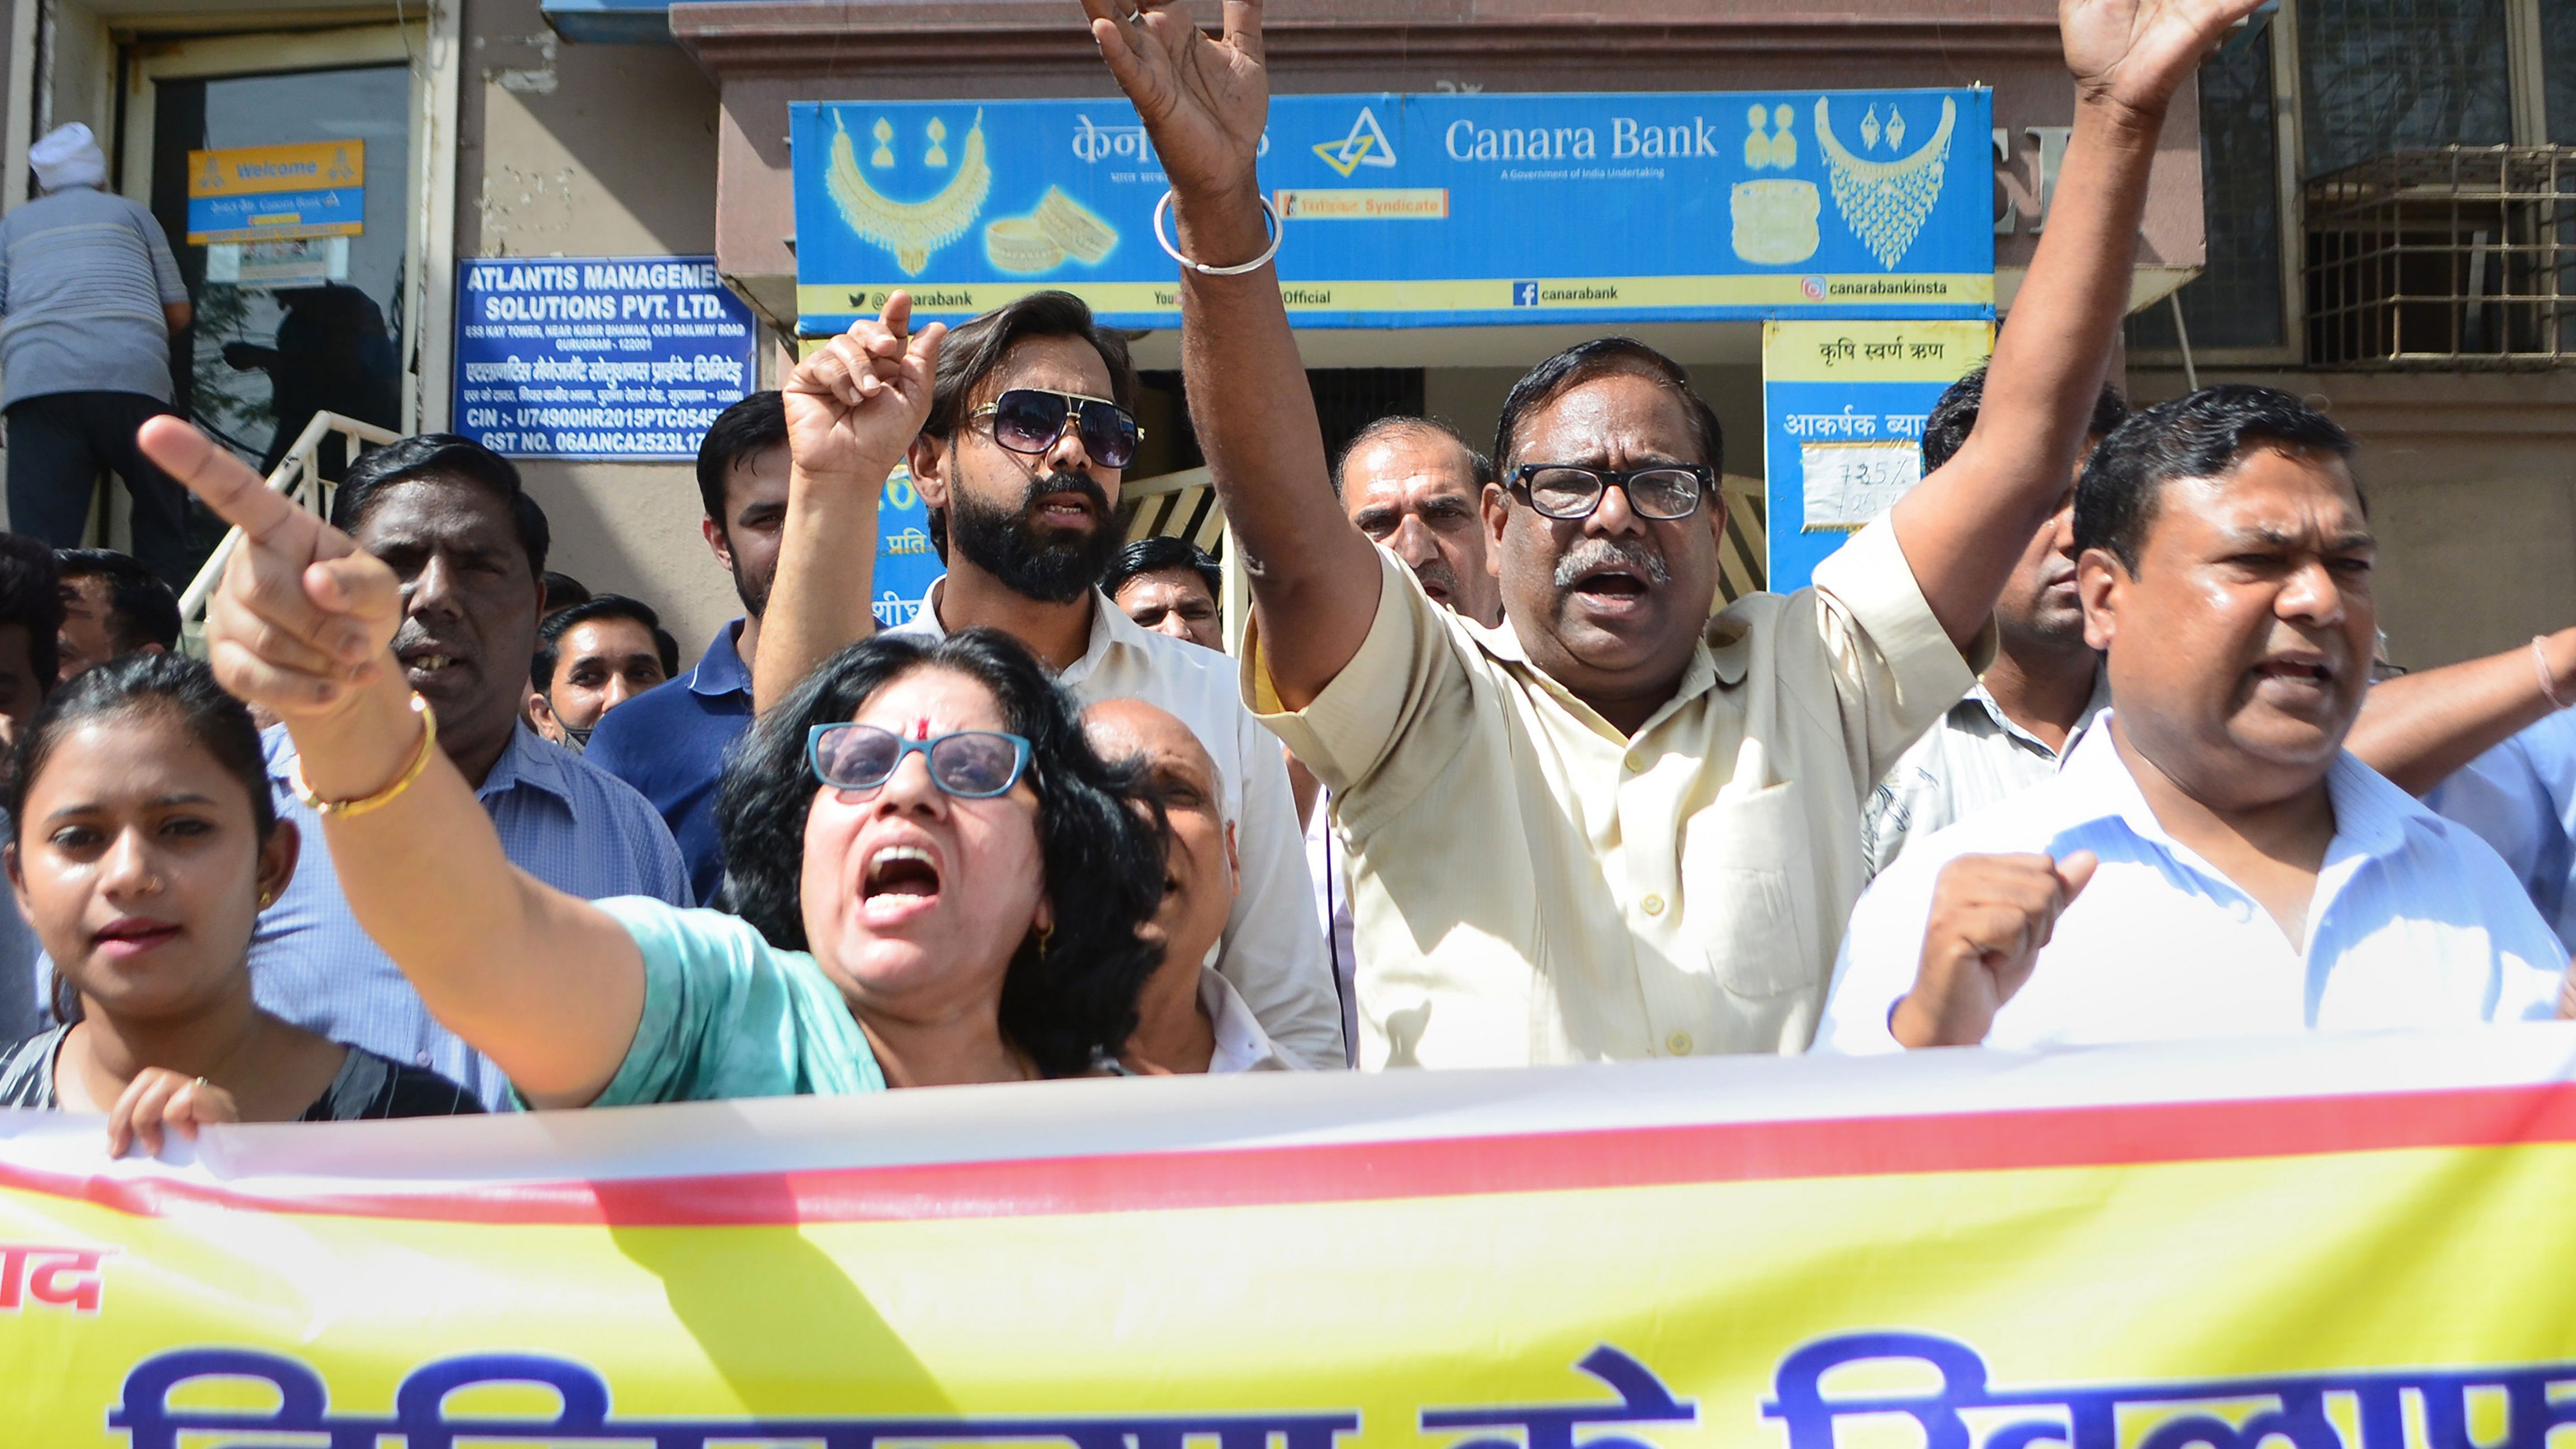  Employees of the Canara Bank raise slogans in protest during 'Bharat Bandh', a two-day nationwide strike supported by the All India Bank Employees Association over the government’s plan to privatise public sector banks and the Banking Laws Amendment Bill 2021, in Gurugram. Credit: PTI File Photo